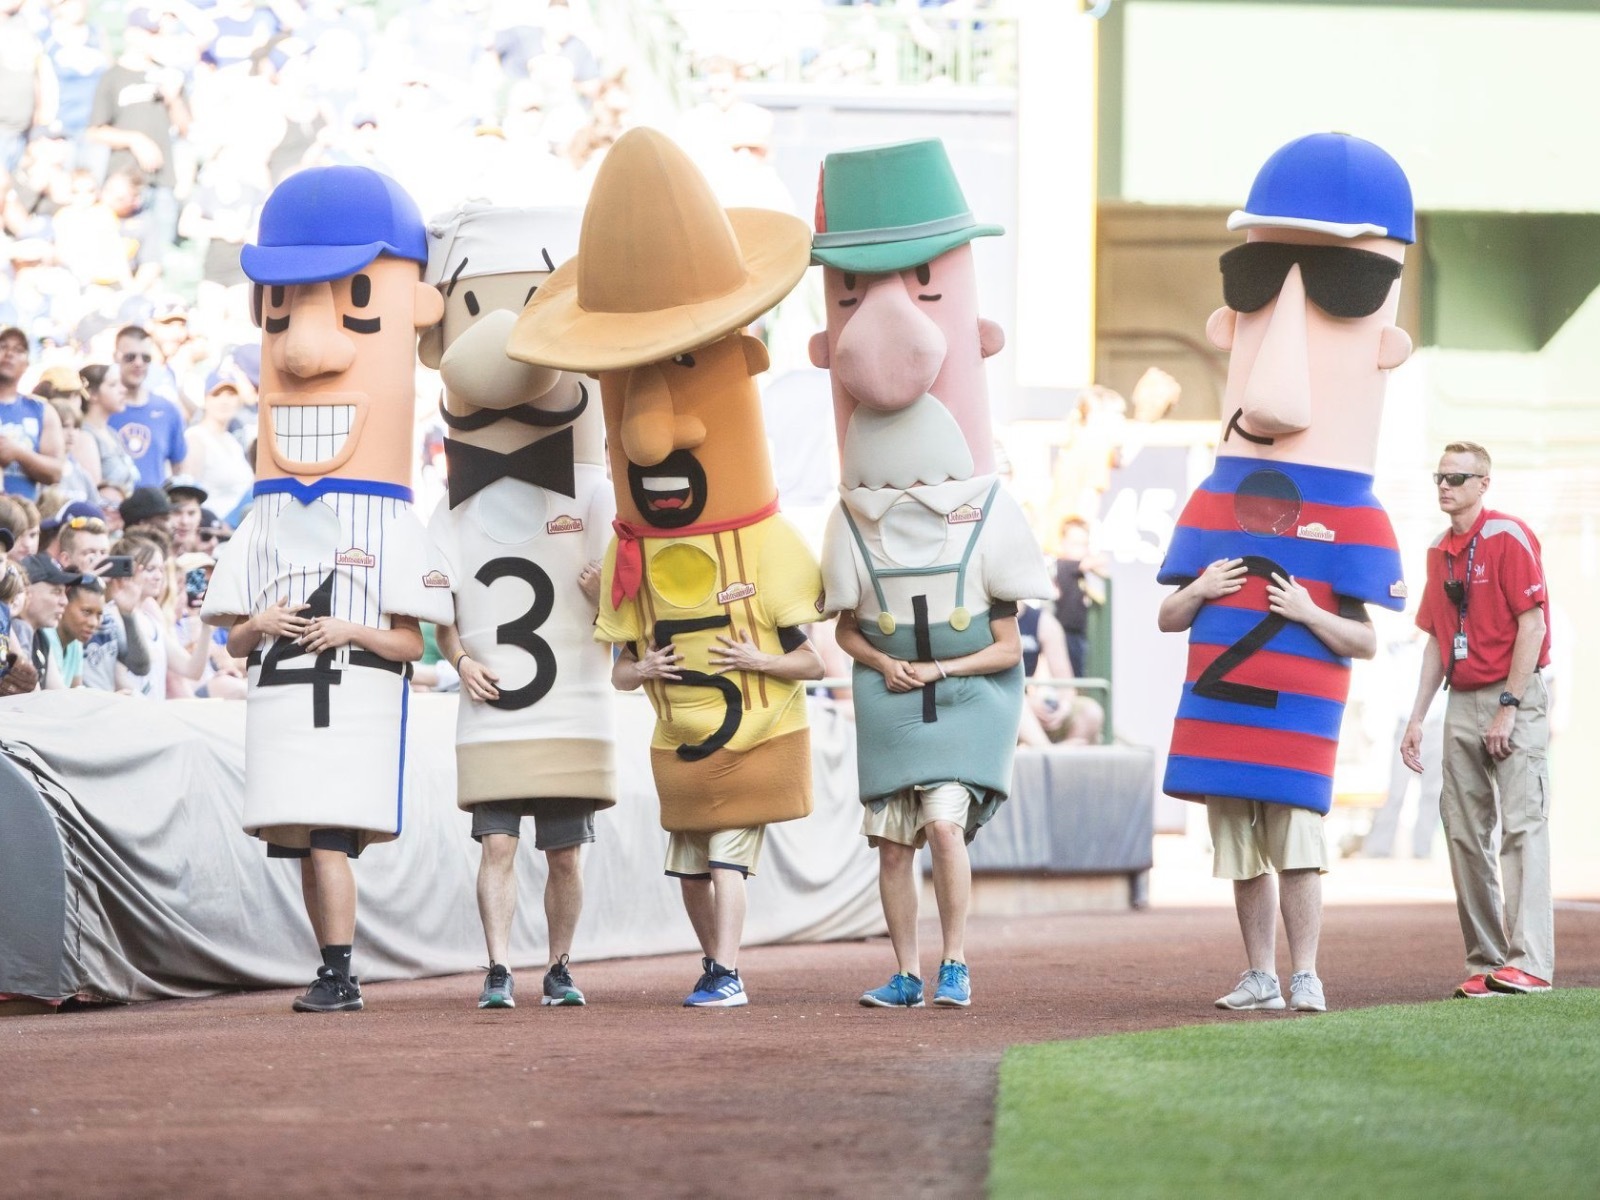 Wisconsin GOP wants Bucks, Brewers players, racing sausages banned